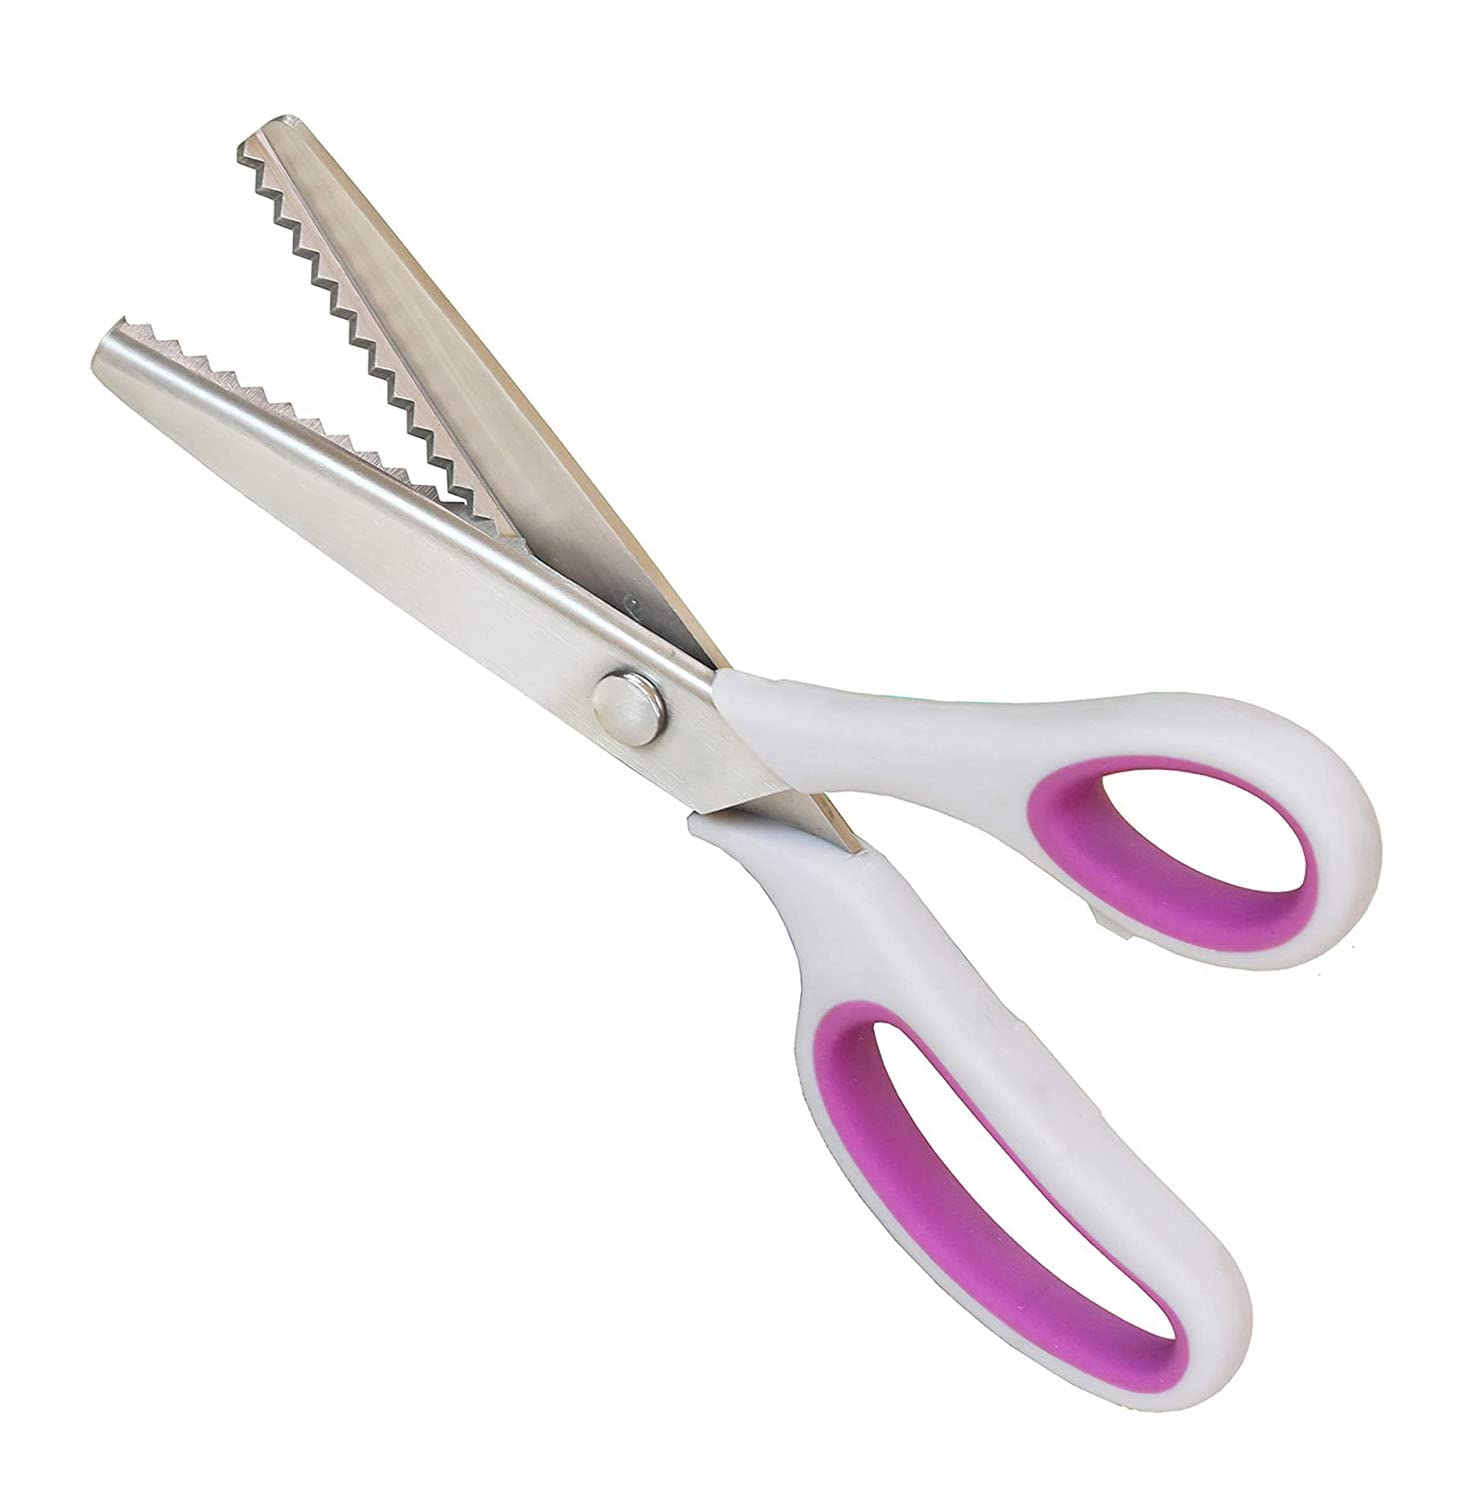 Pinking Shears, Stainless Steel Dressmaking Scissors, Serrated and Scalloped Blades, Professional Sewing Craft Cut Tailor Zig-Zag Tool, Fabric